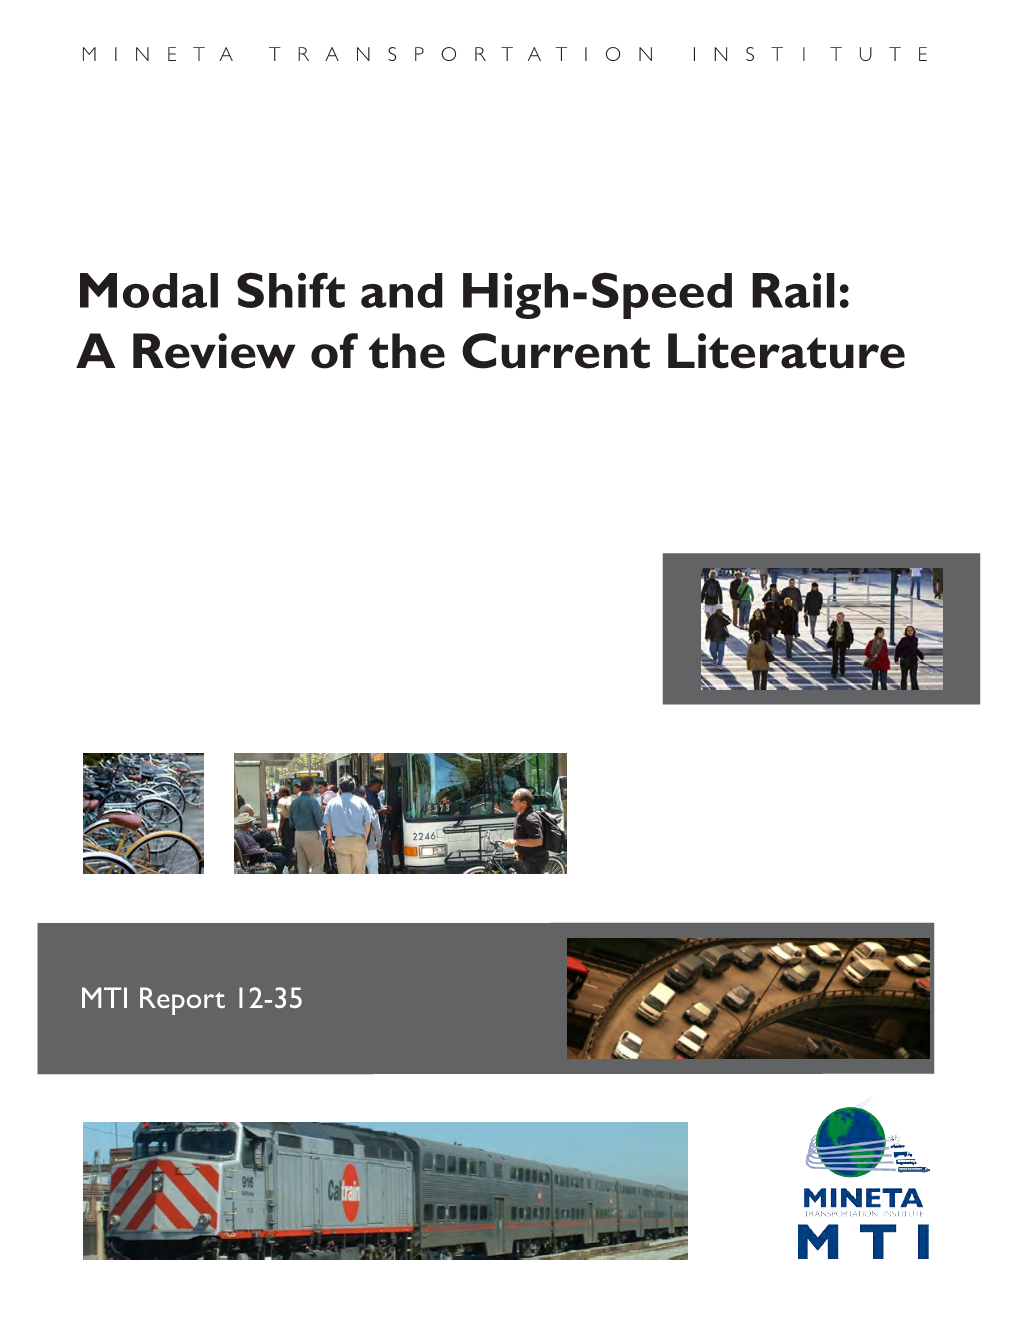 Modal Shift and High-Speed Rail: a Review of the Current Literature a Review Current Rail: of the High-Speed and Shift Modal